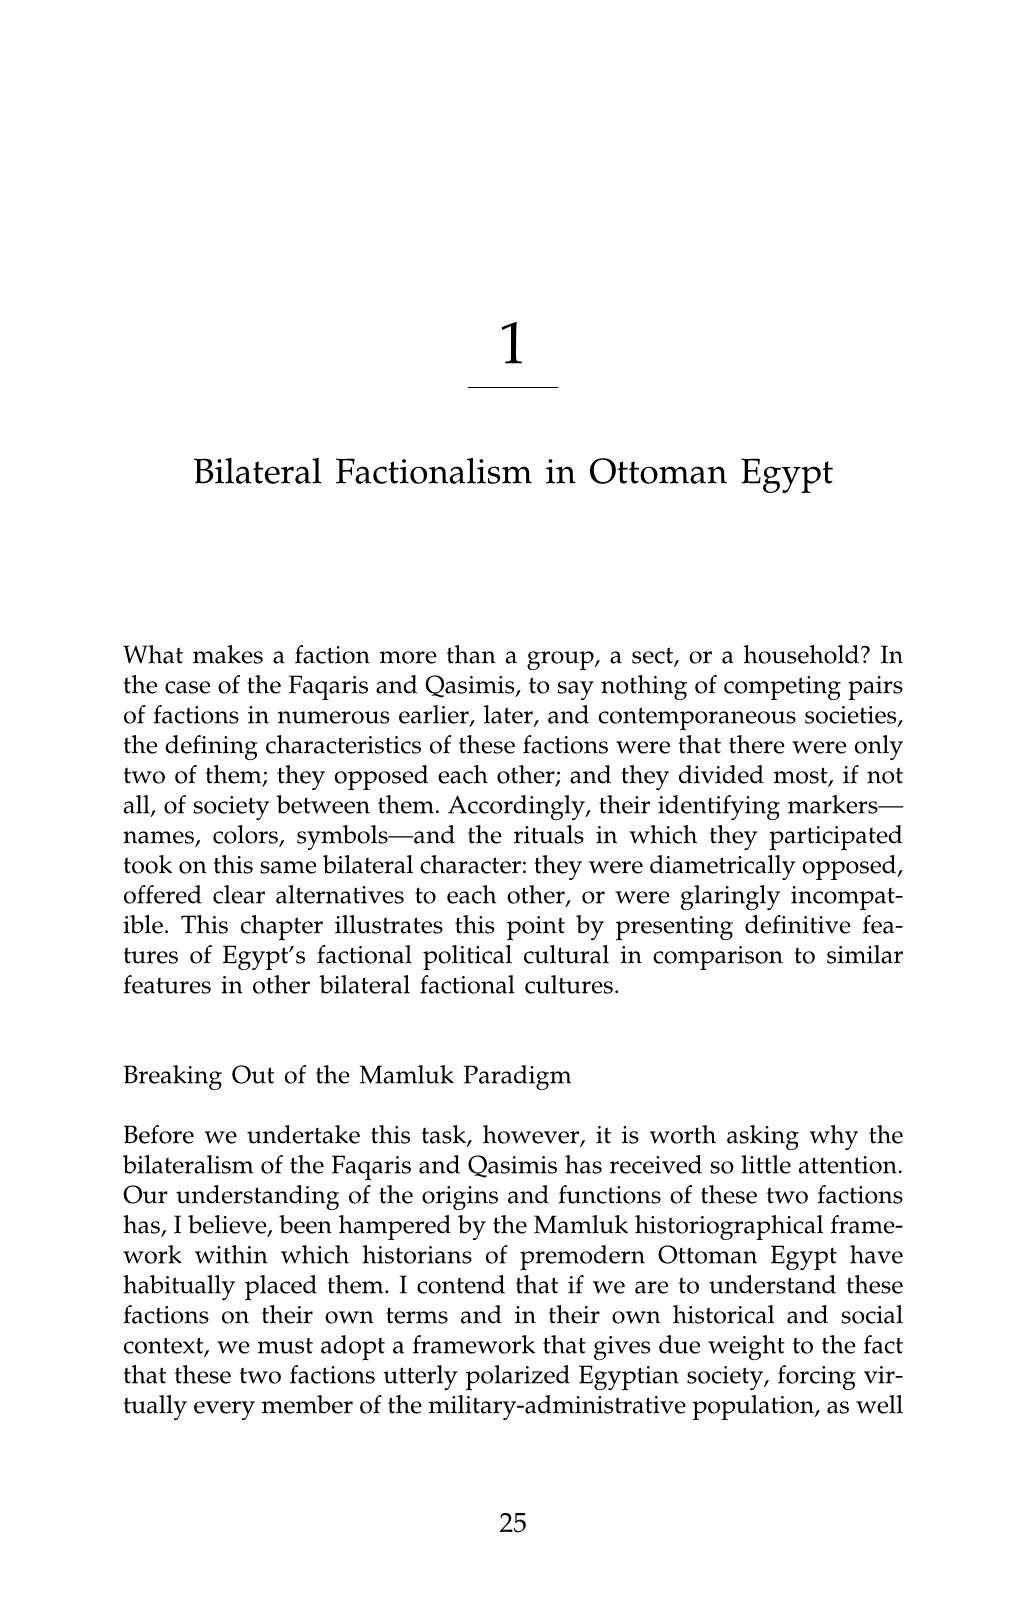 Bilateral Factionalism in Ottoman Egypt